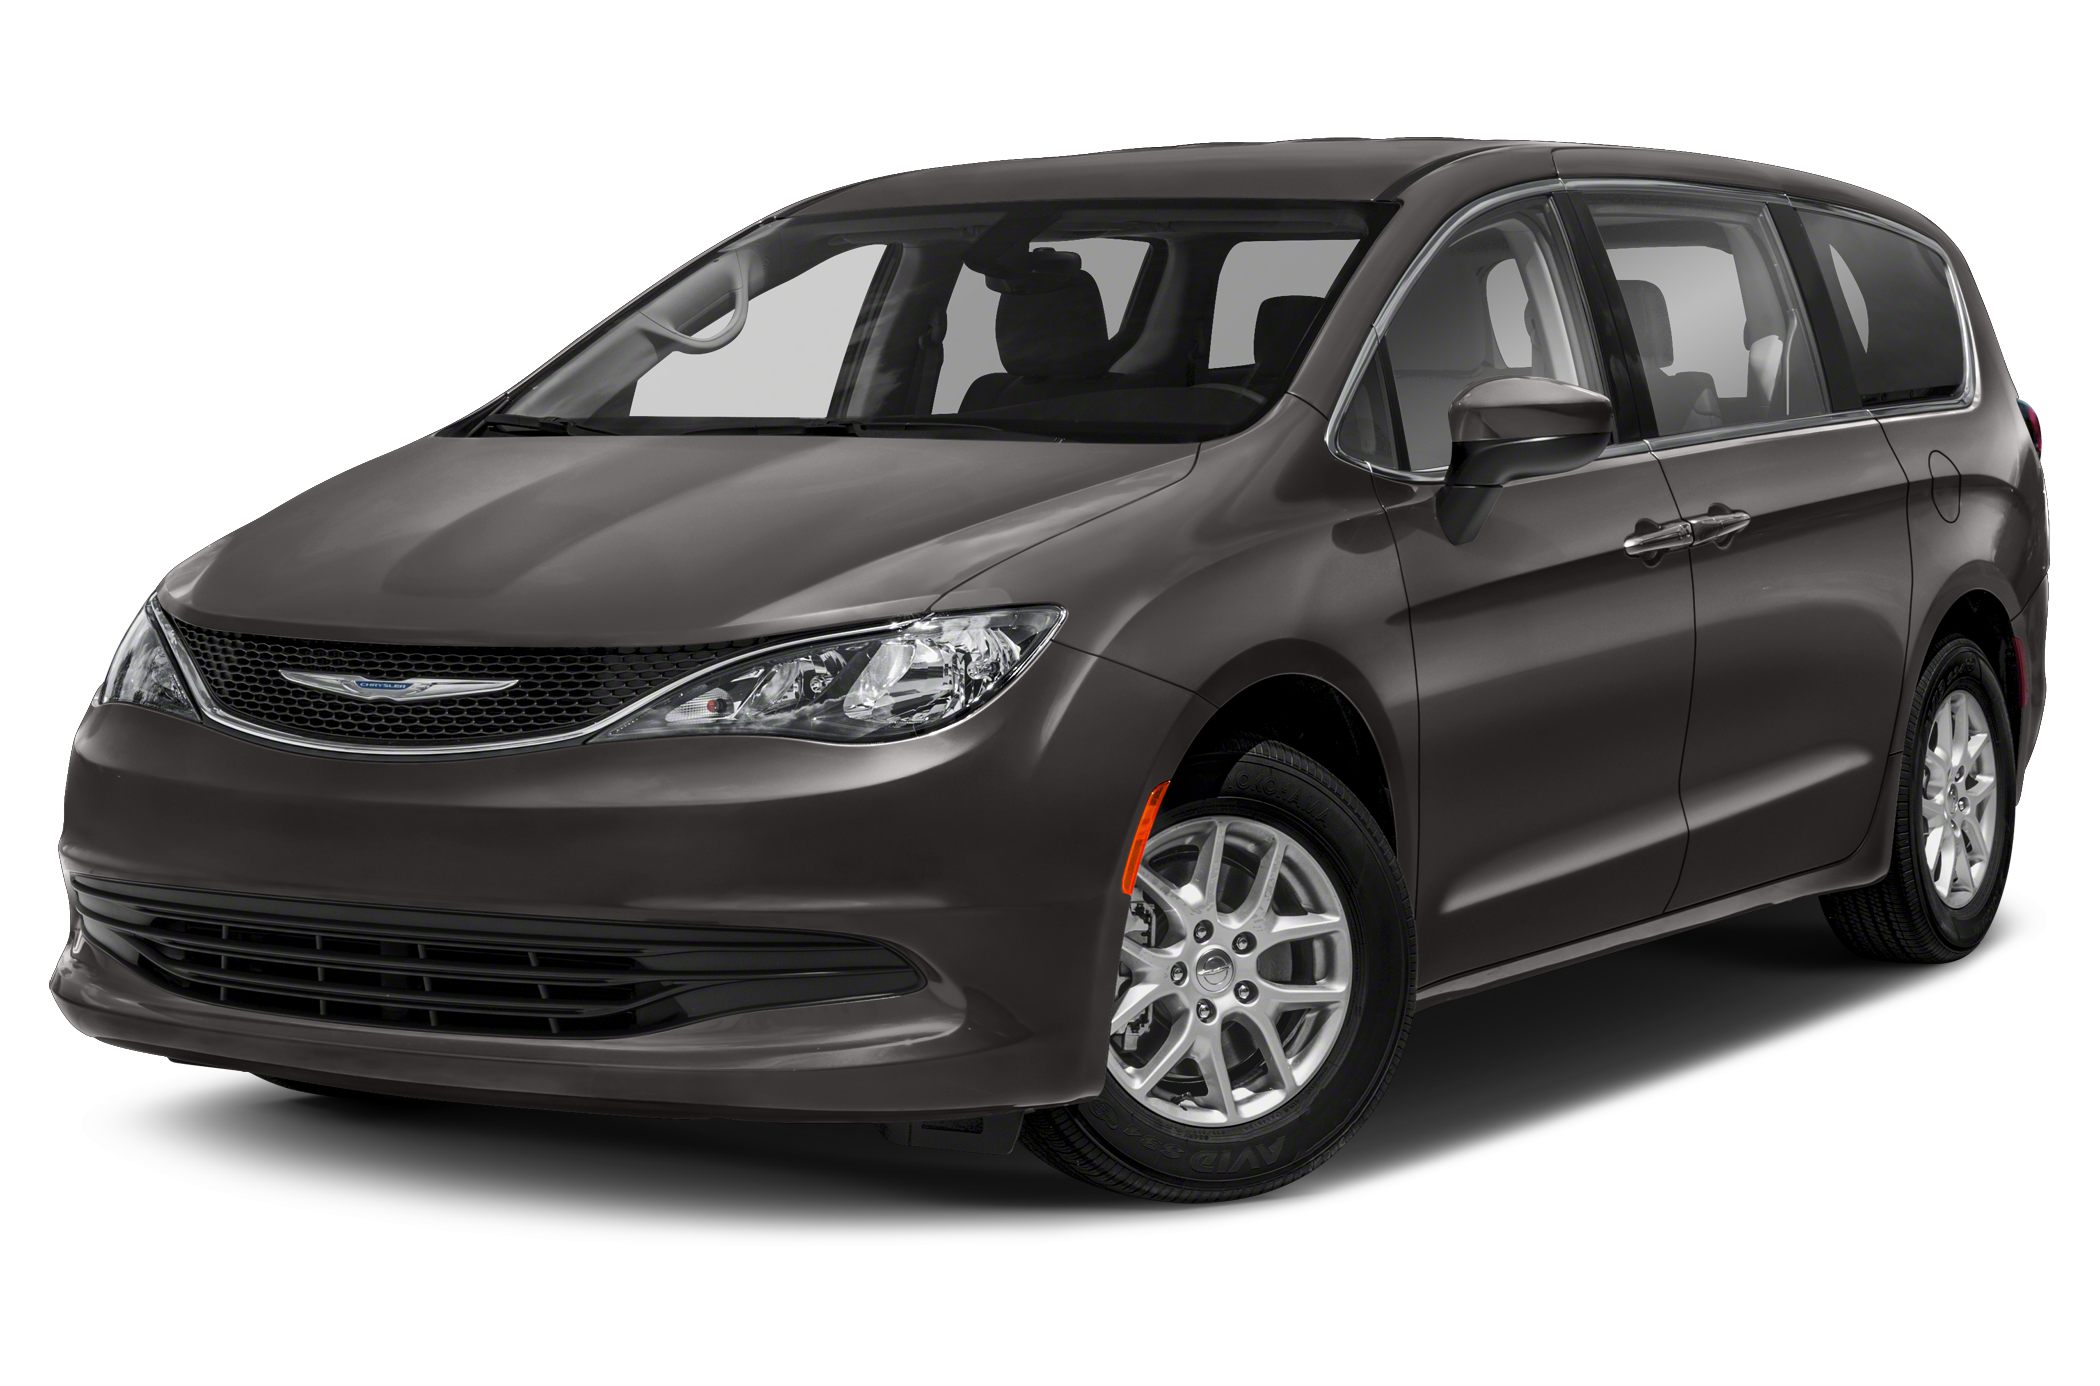 2018 Chrysler Pacifica Specs and Prices